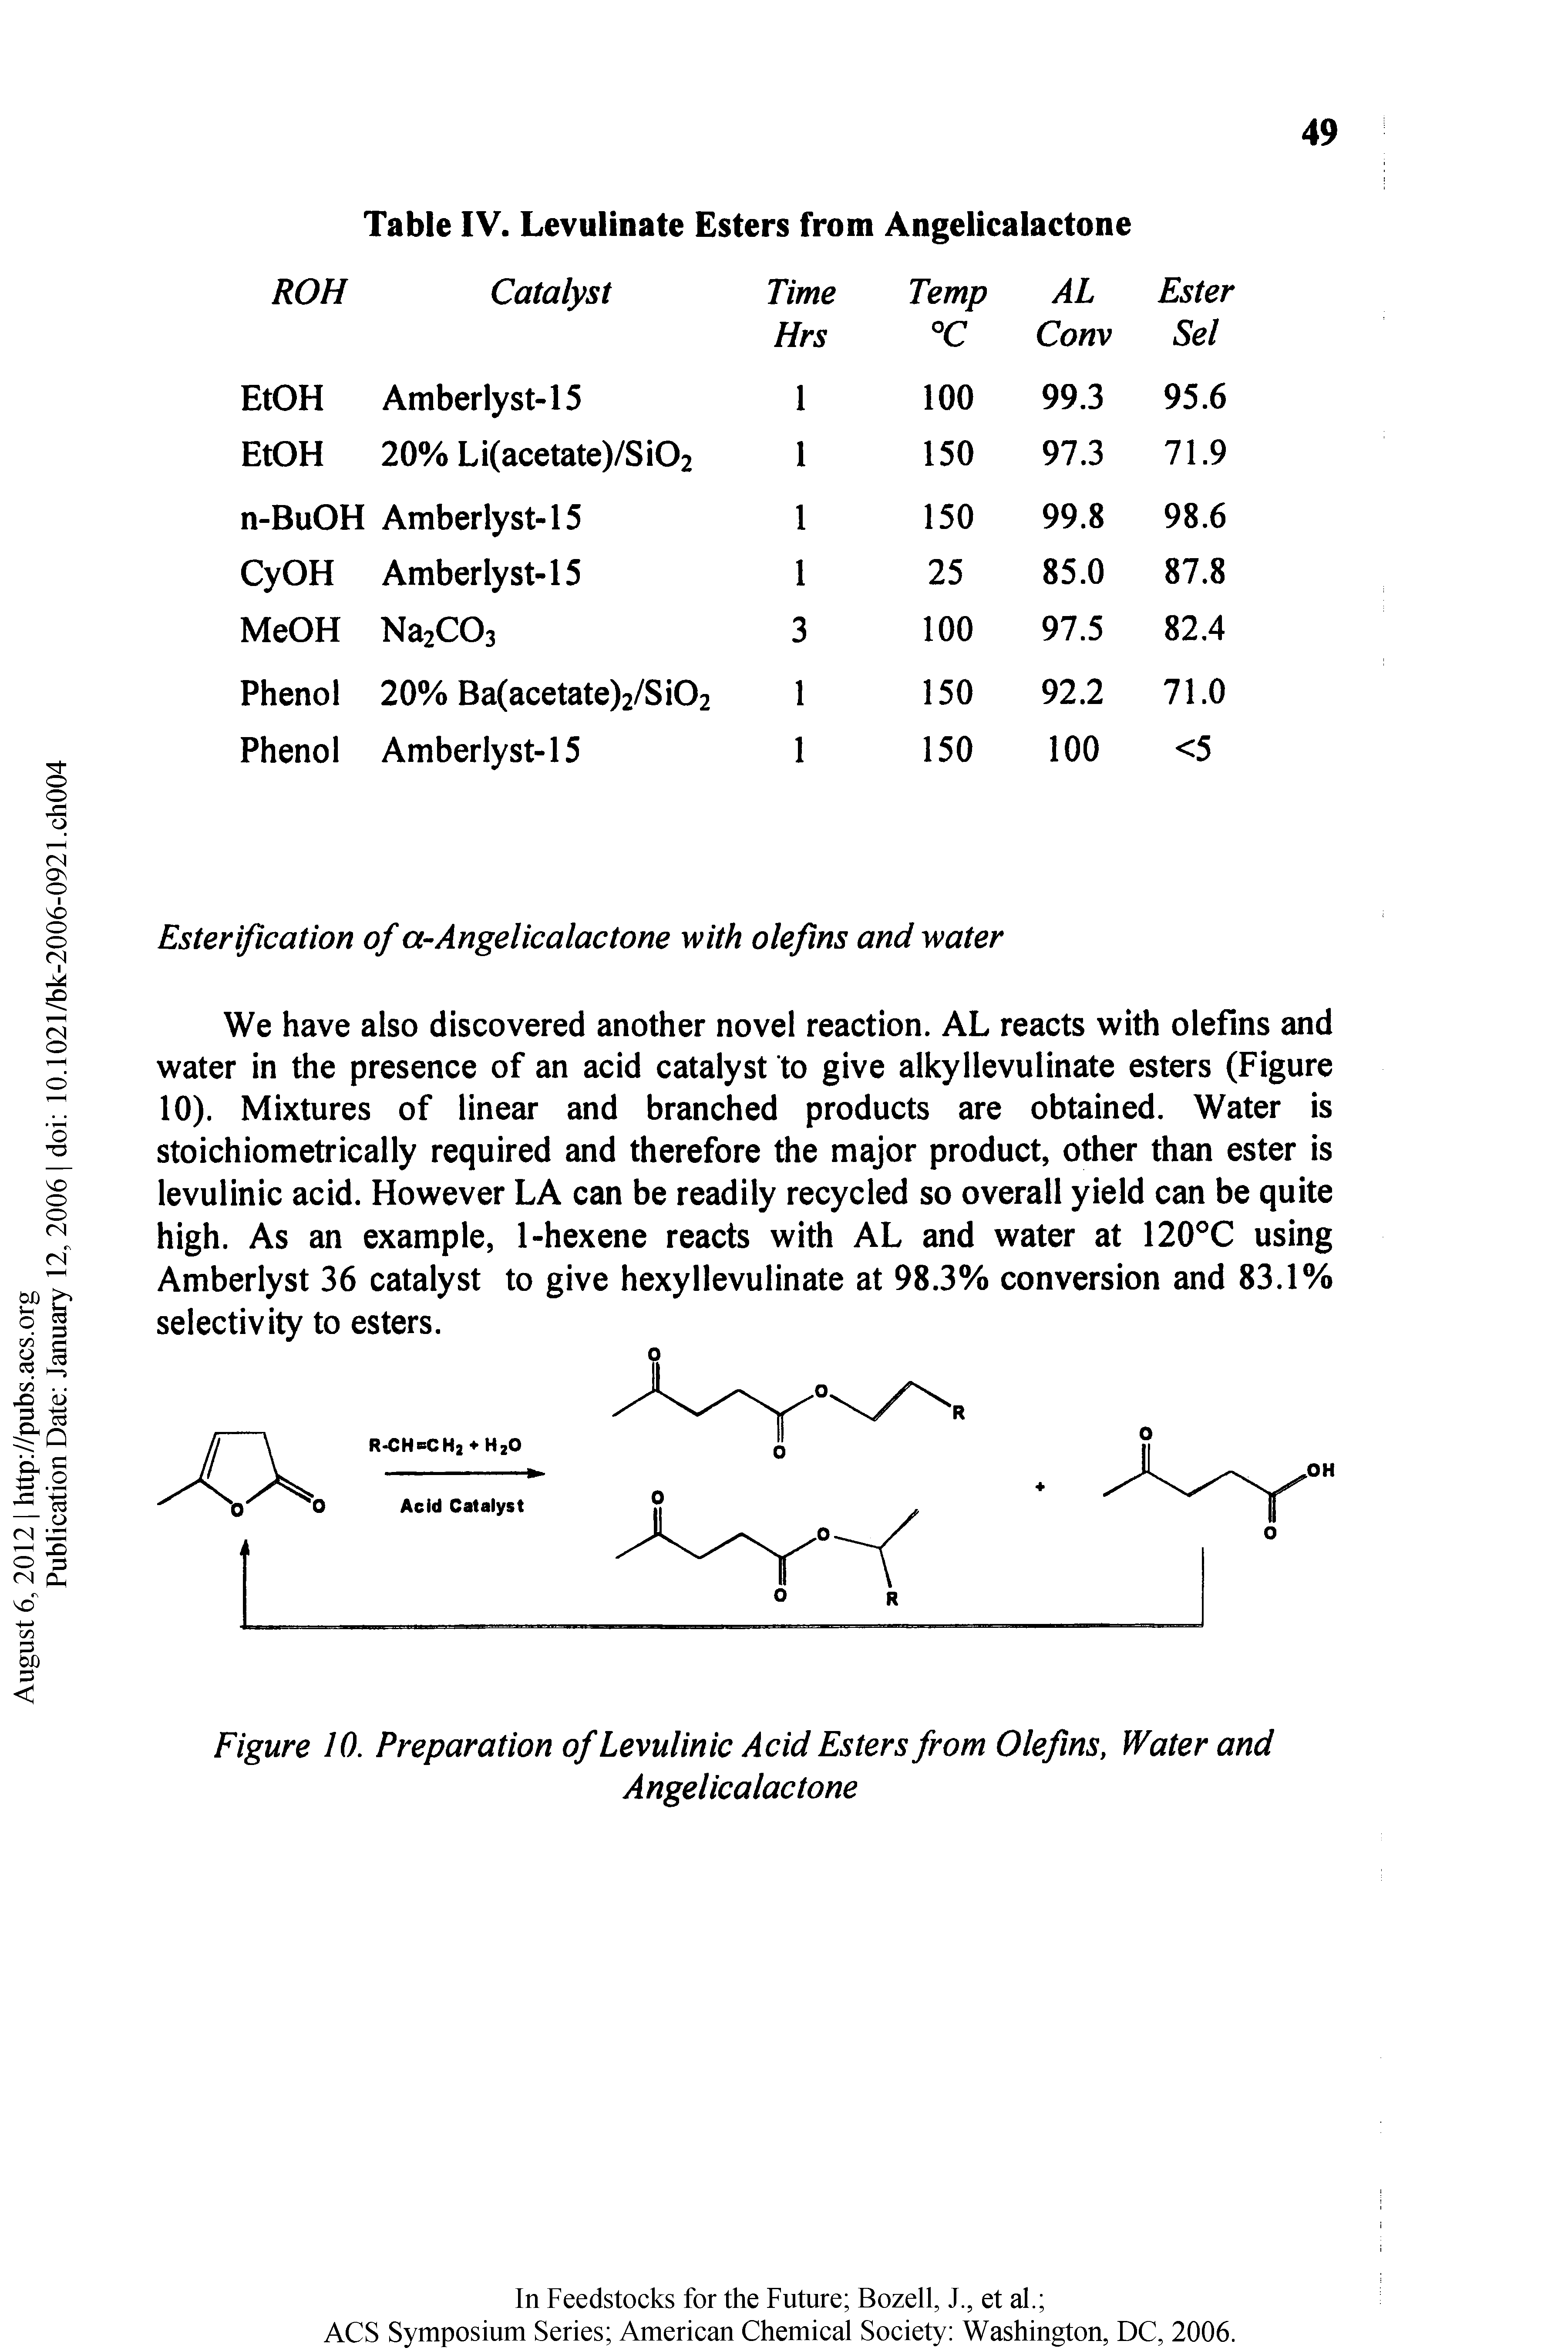 Figure 10. Preparation of Levulinic Acid Esters from Olefins, Water and...